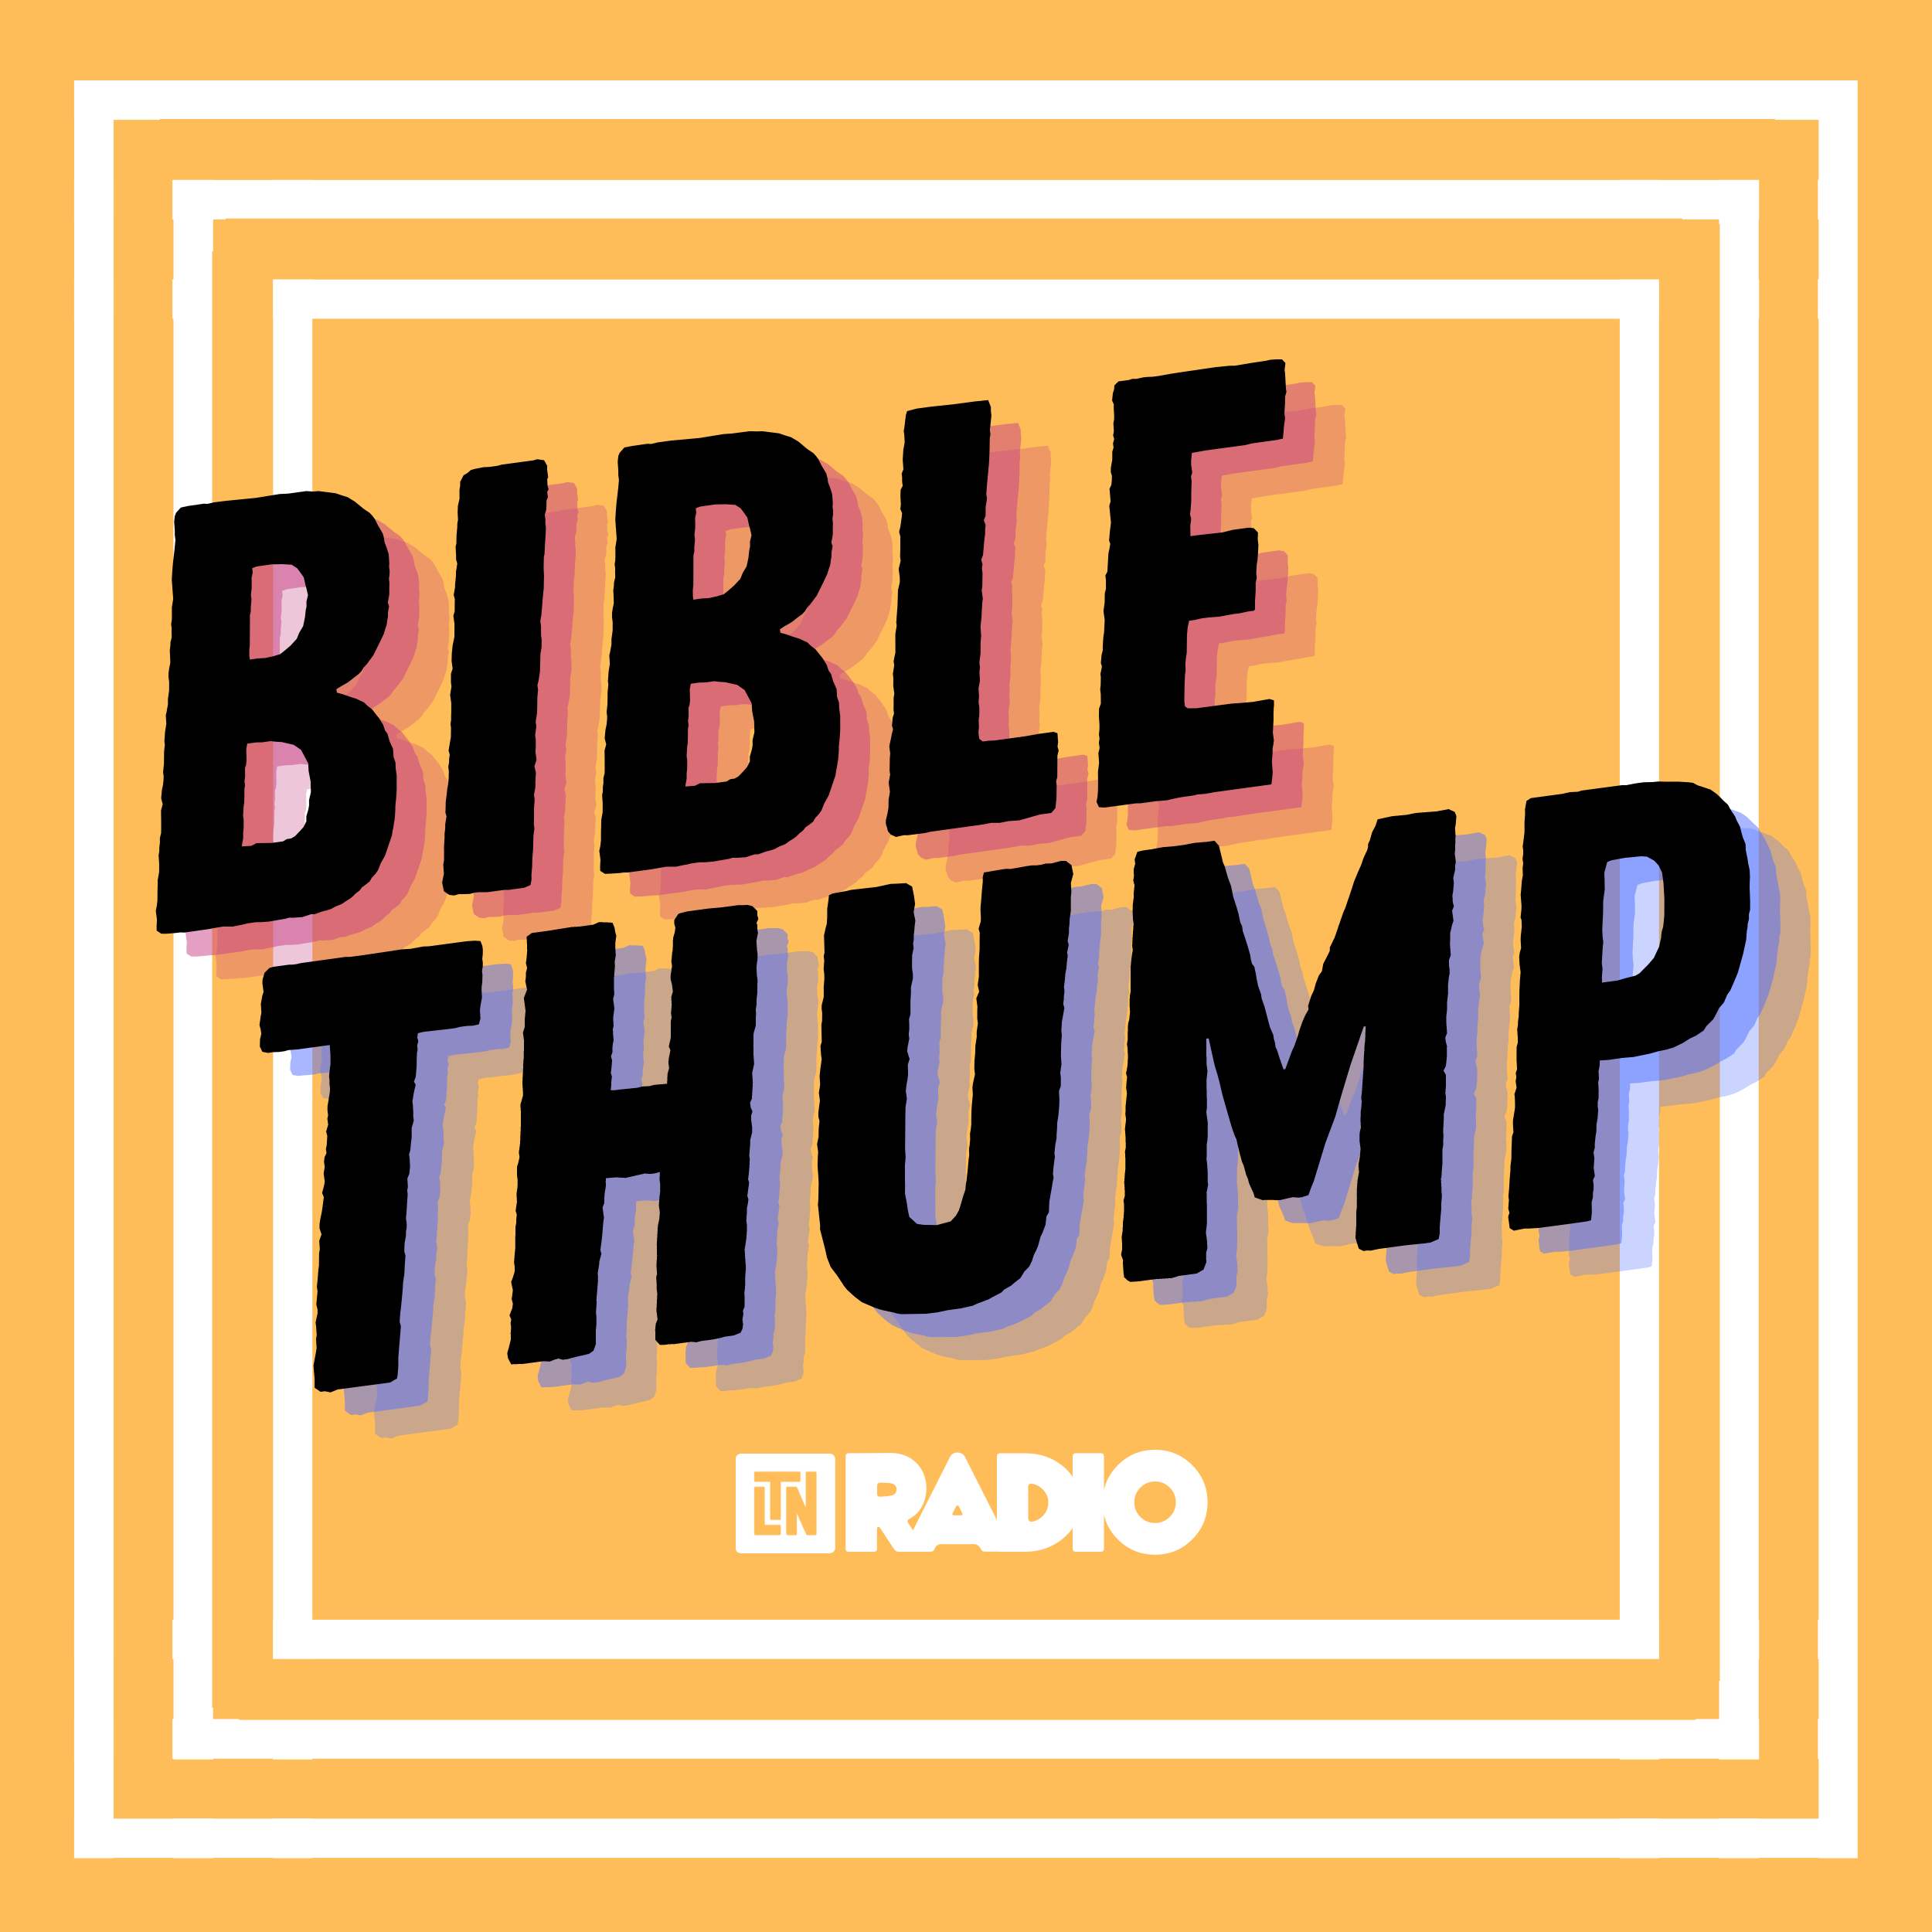 Bible Thump | Embodied Theology